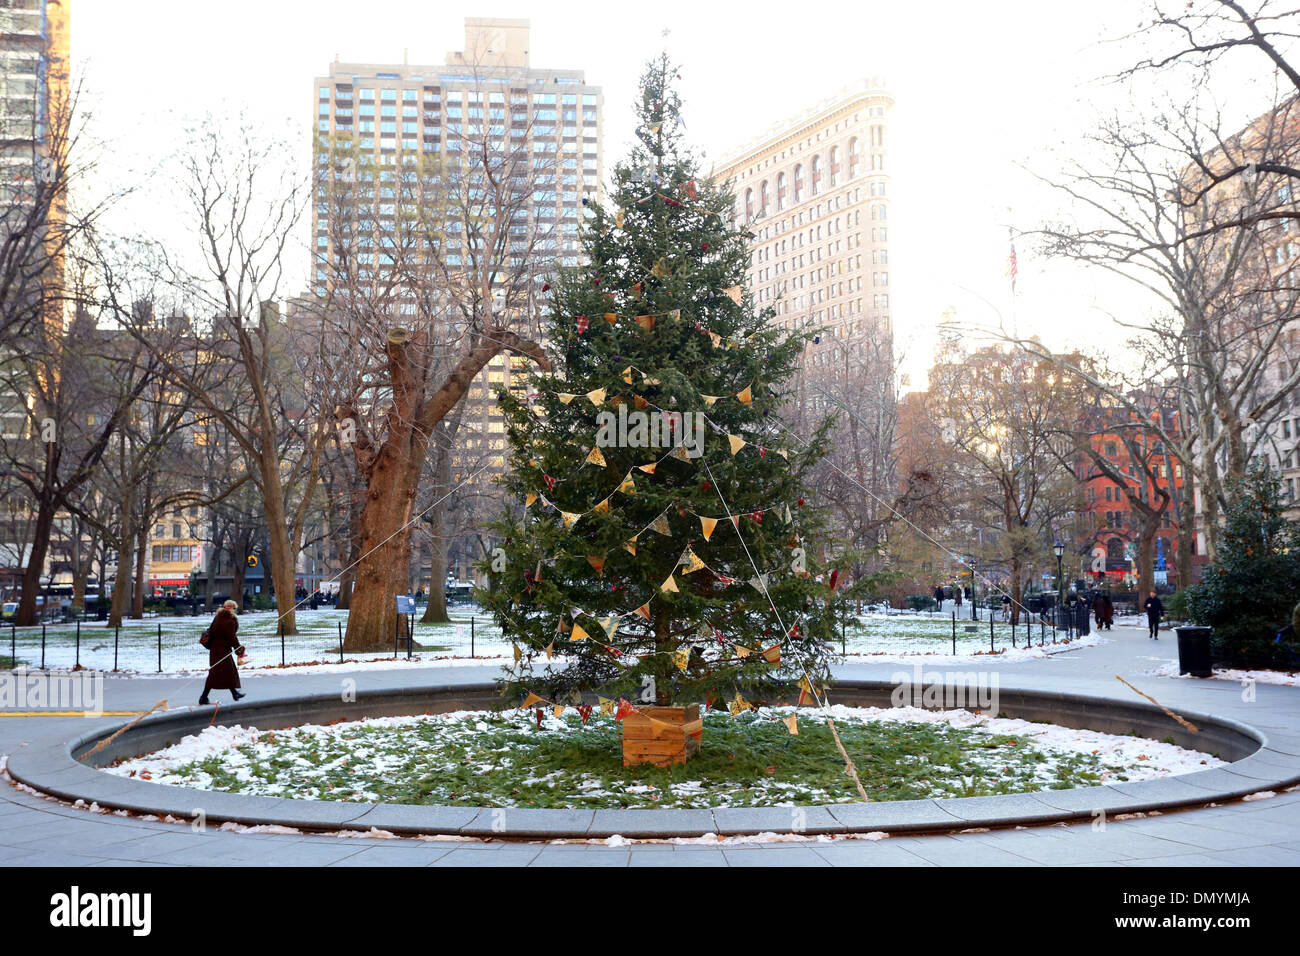 A Christmas tree in Madison Square Park, New York City Stock Photo